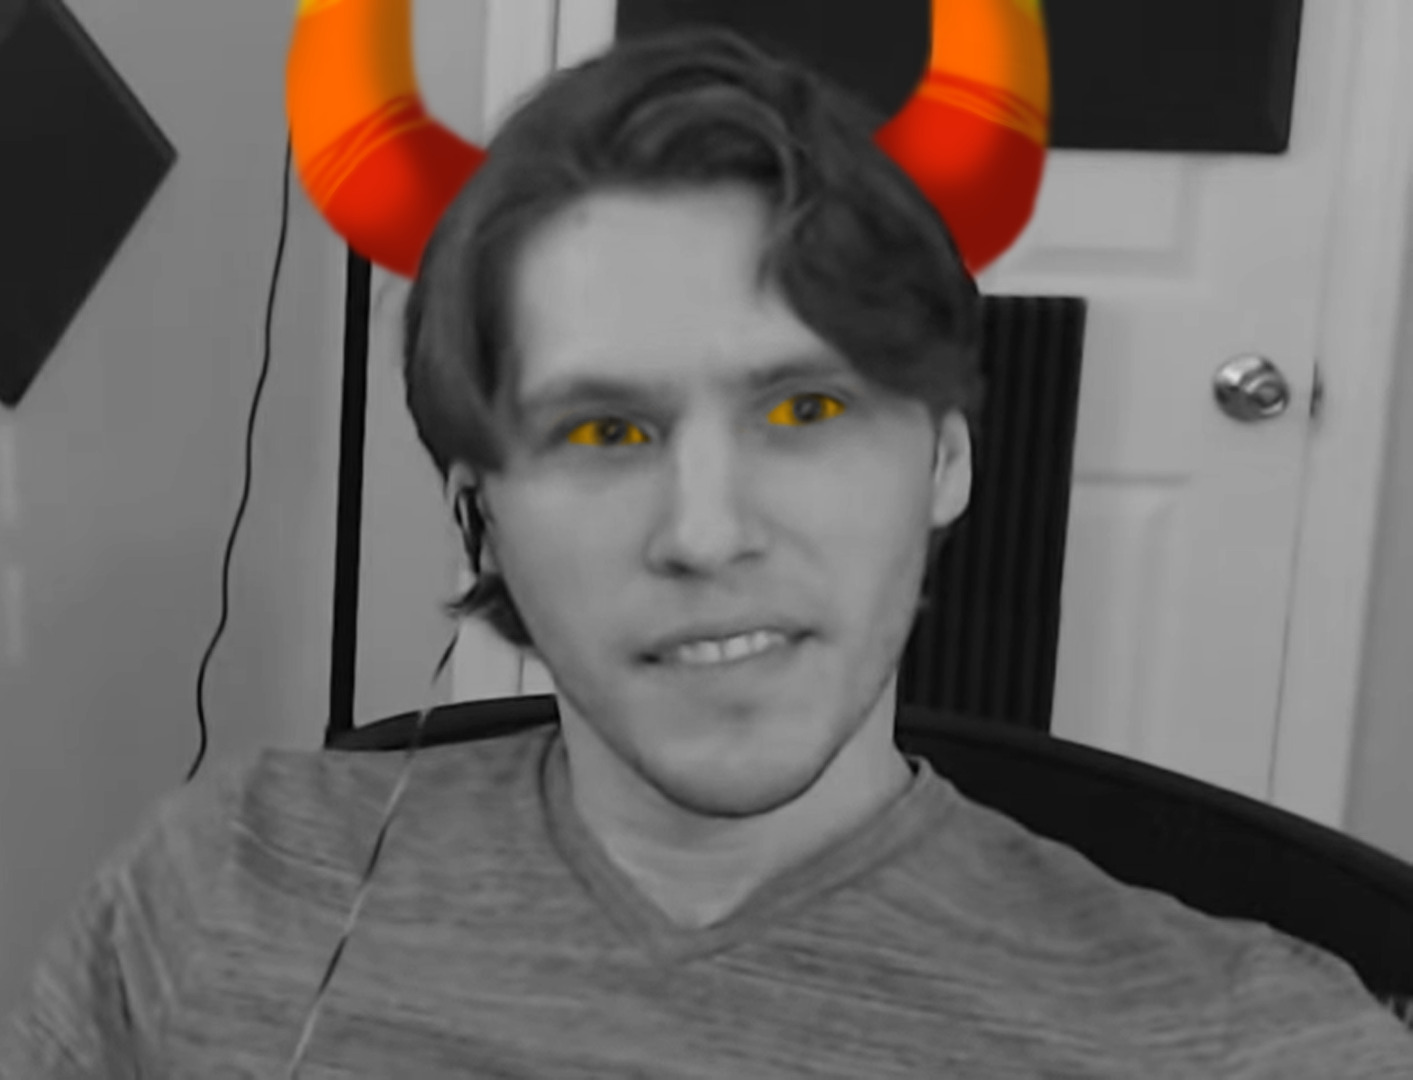 an image of Jerma, a popular twitch streamer, edited to be a homestuck troll.